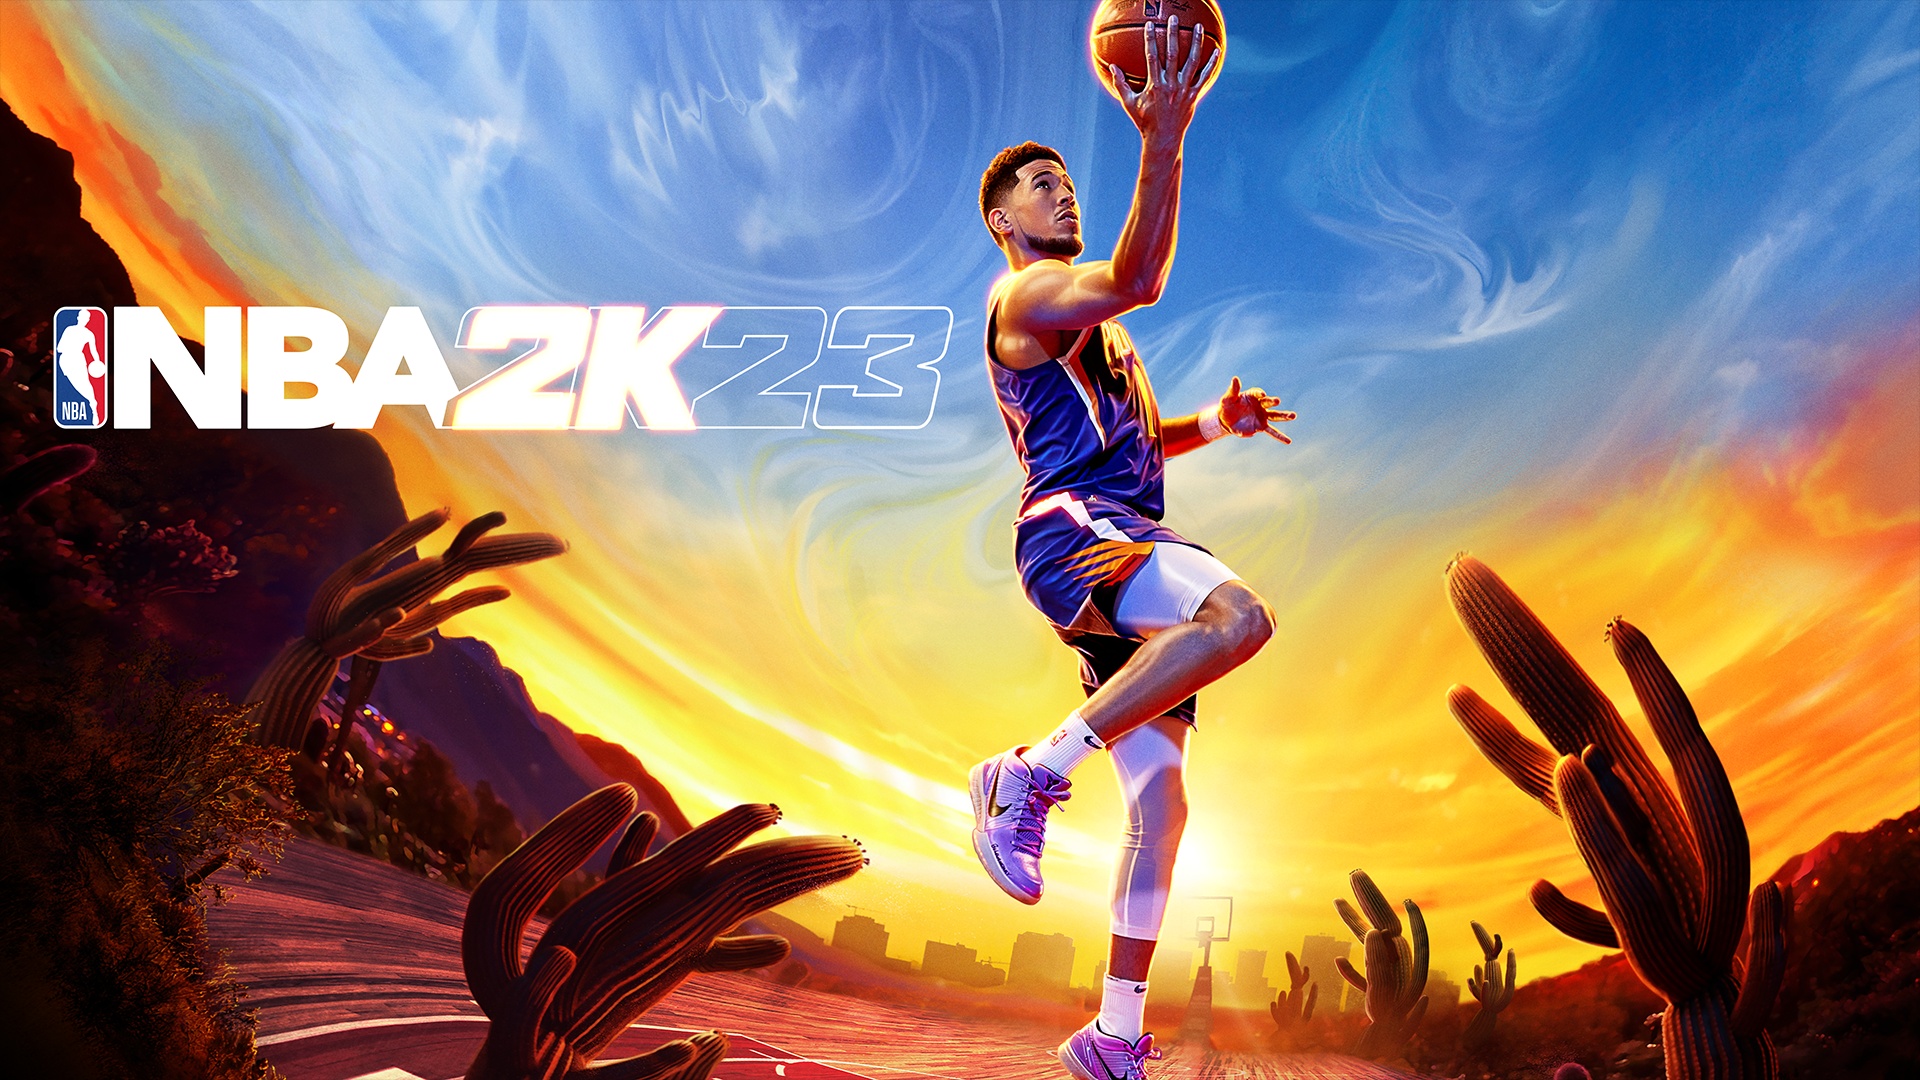 Video For How Will You Answer the Call? NBA 2K23 Now Available